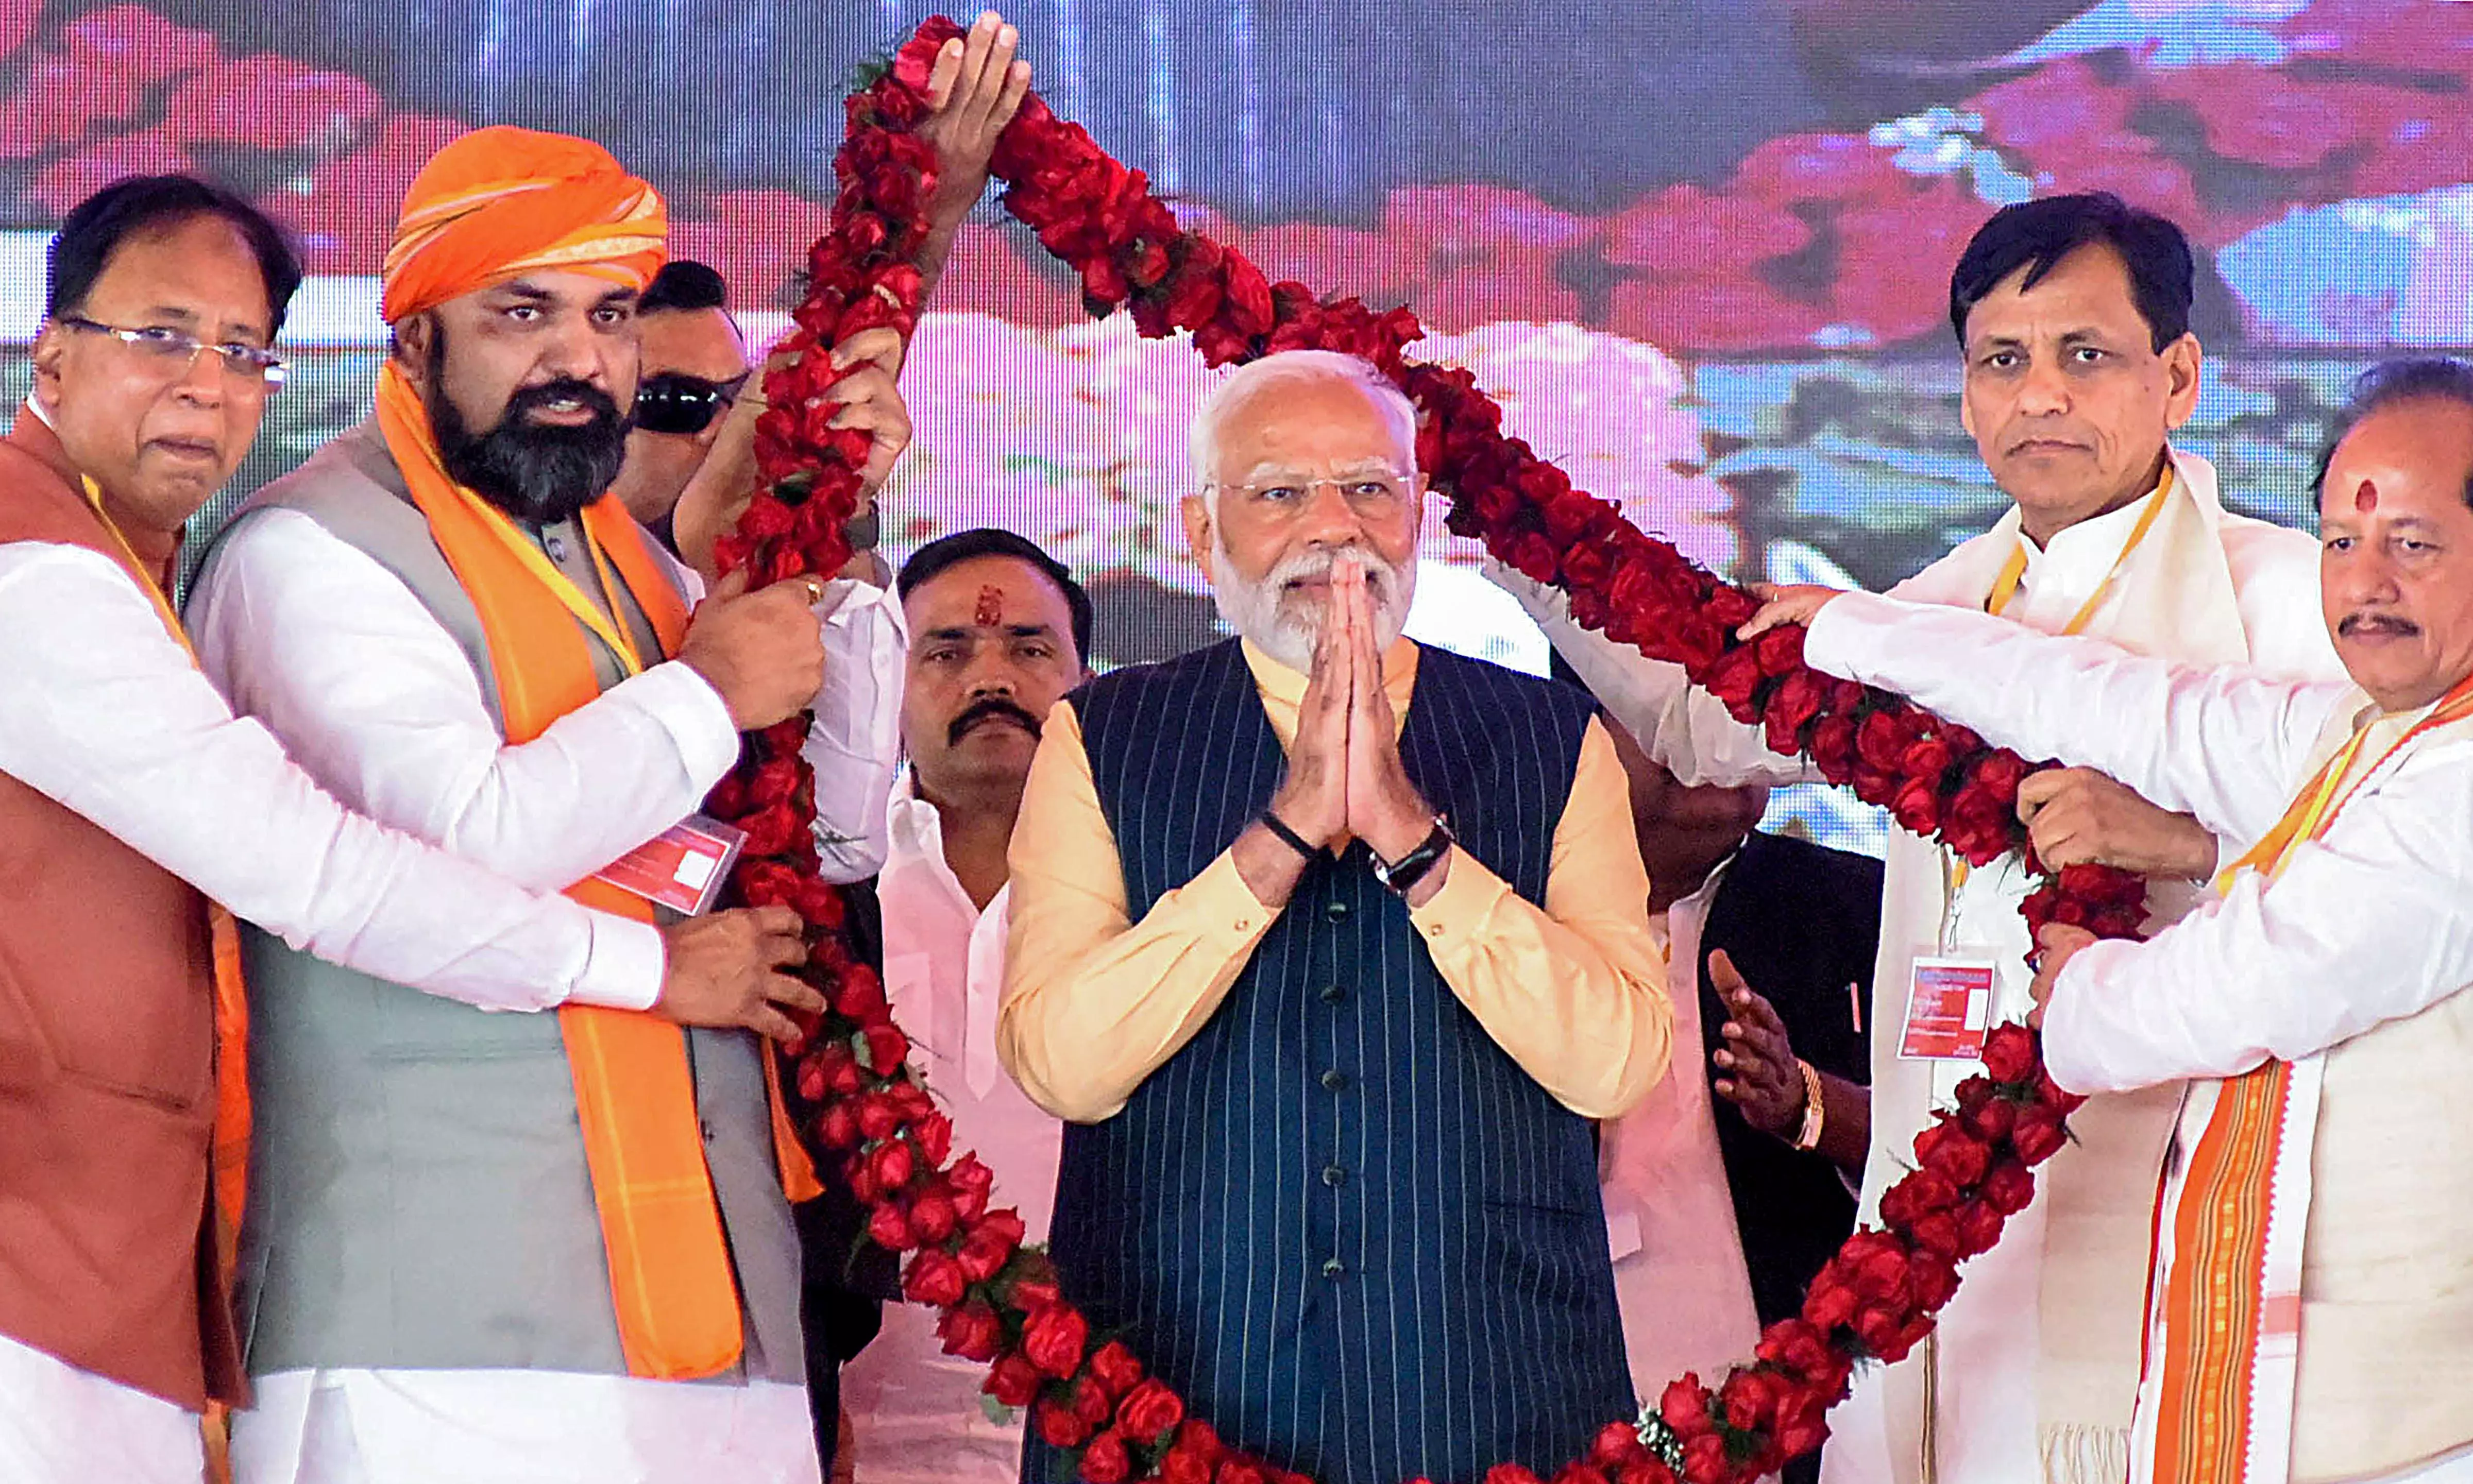 At Bihar rally, PM Modi claims RJD supremo Lalu Prasad and family biggest offenders of state